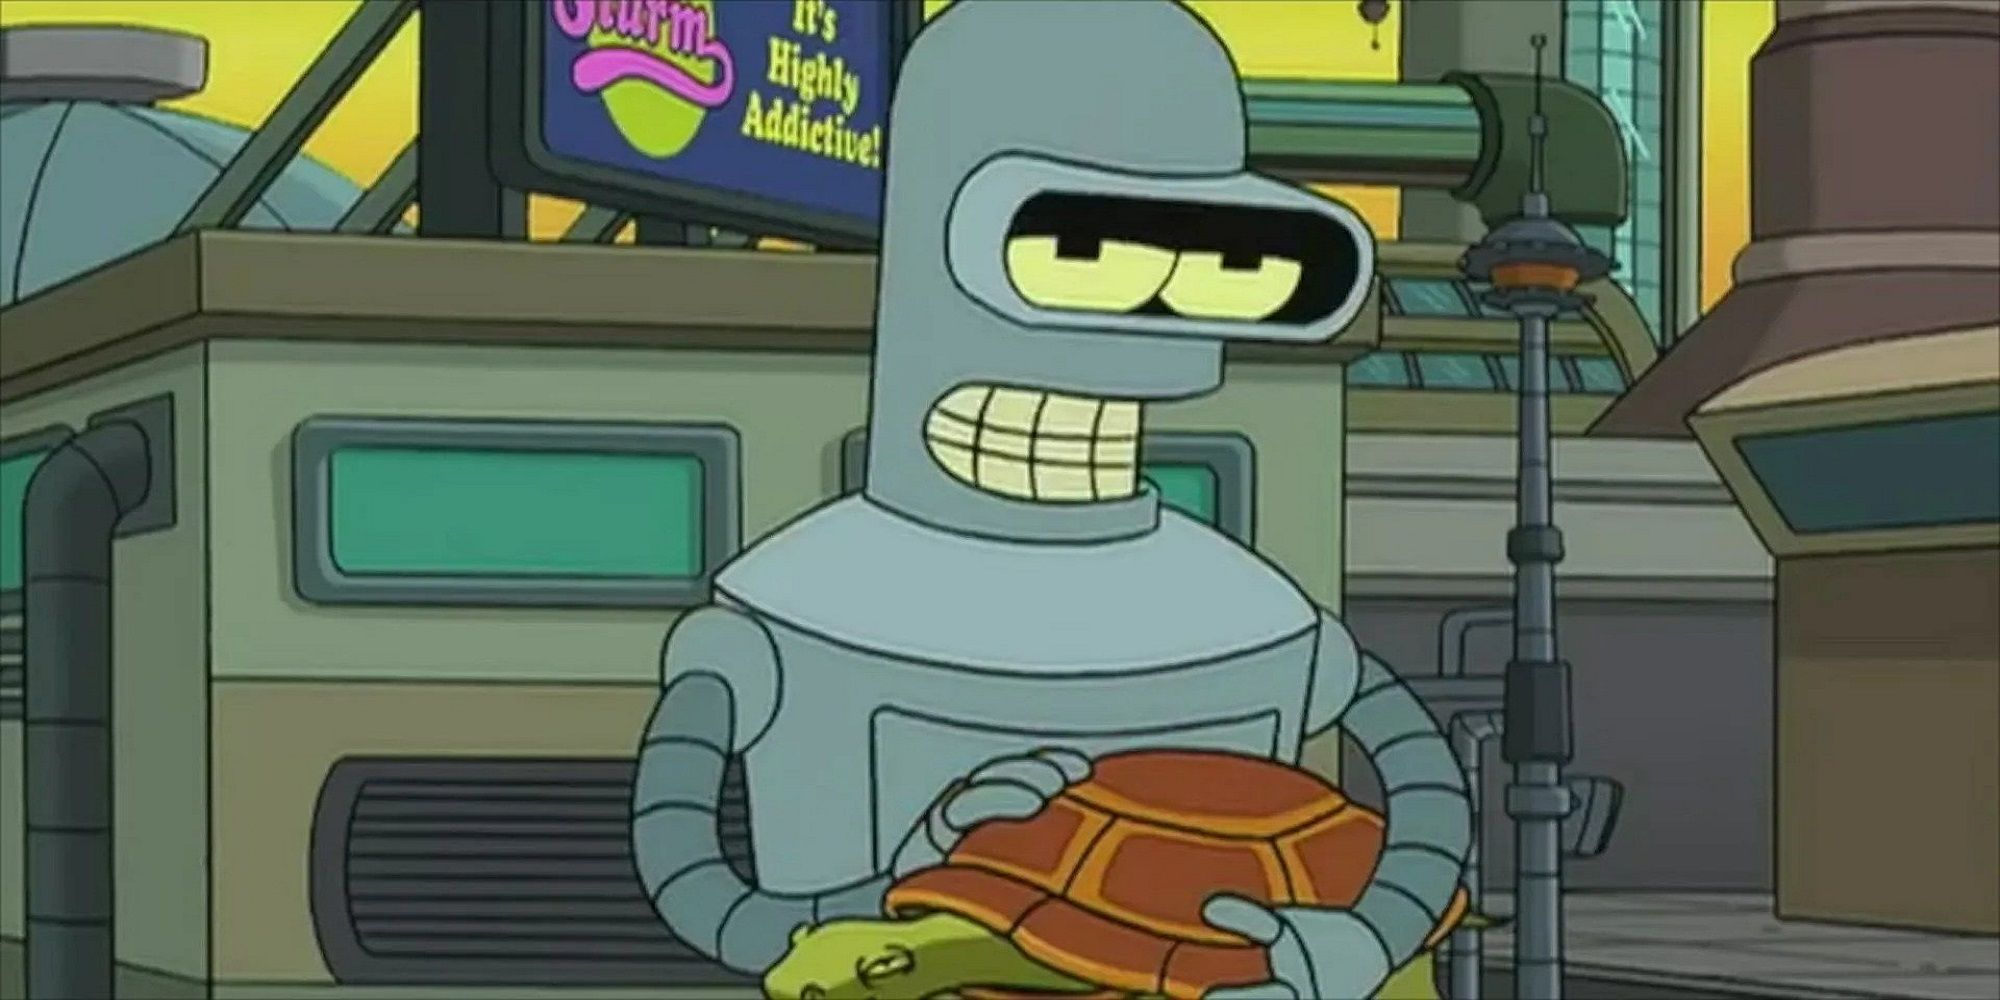 Bender and his turtle